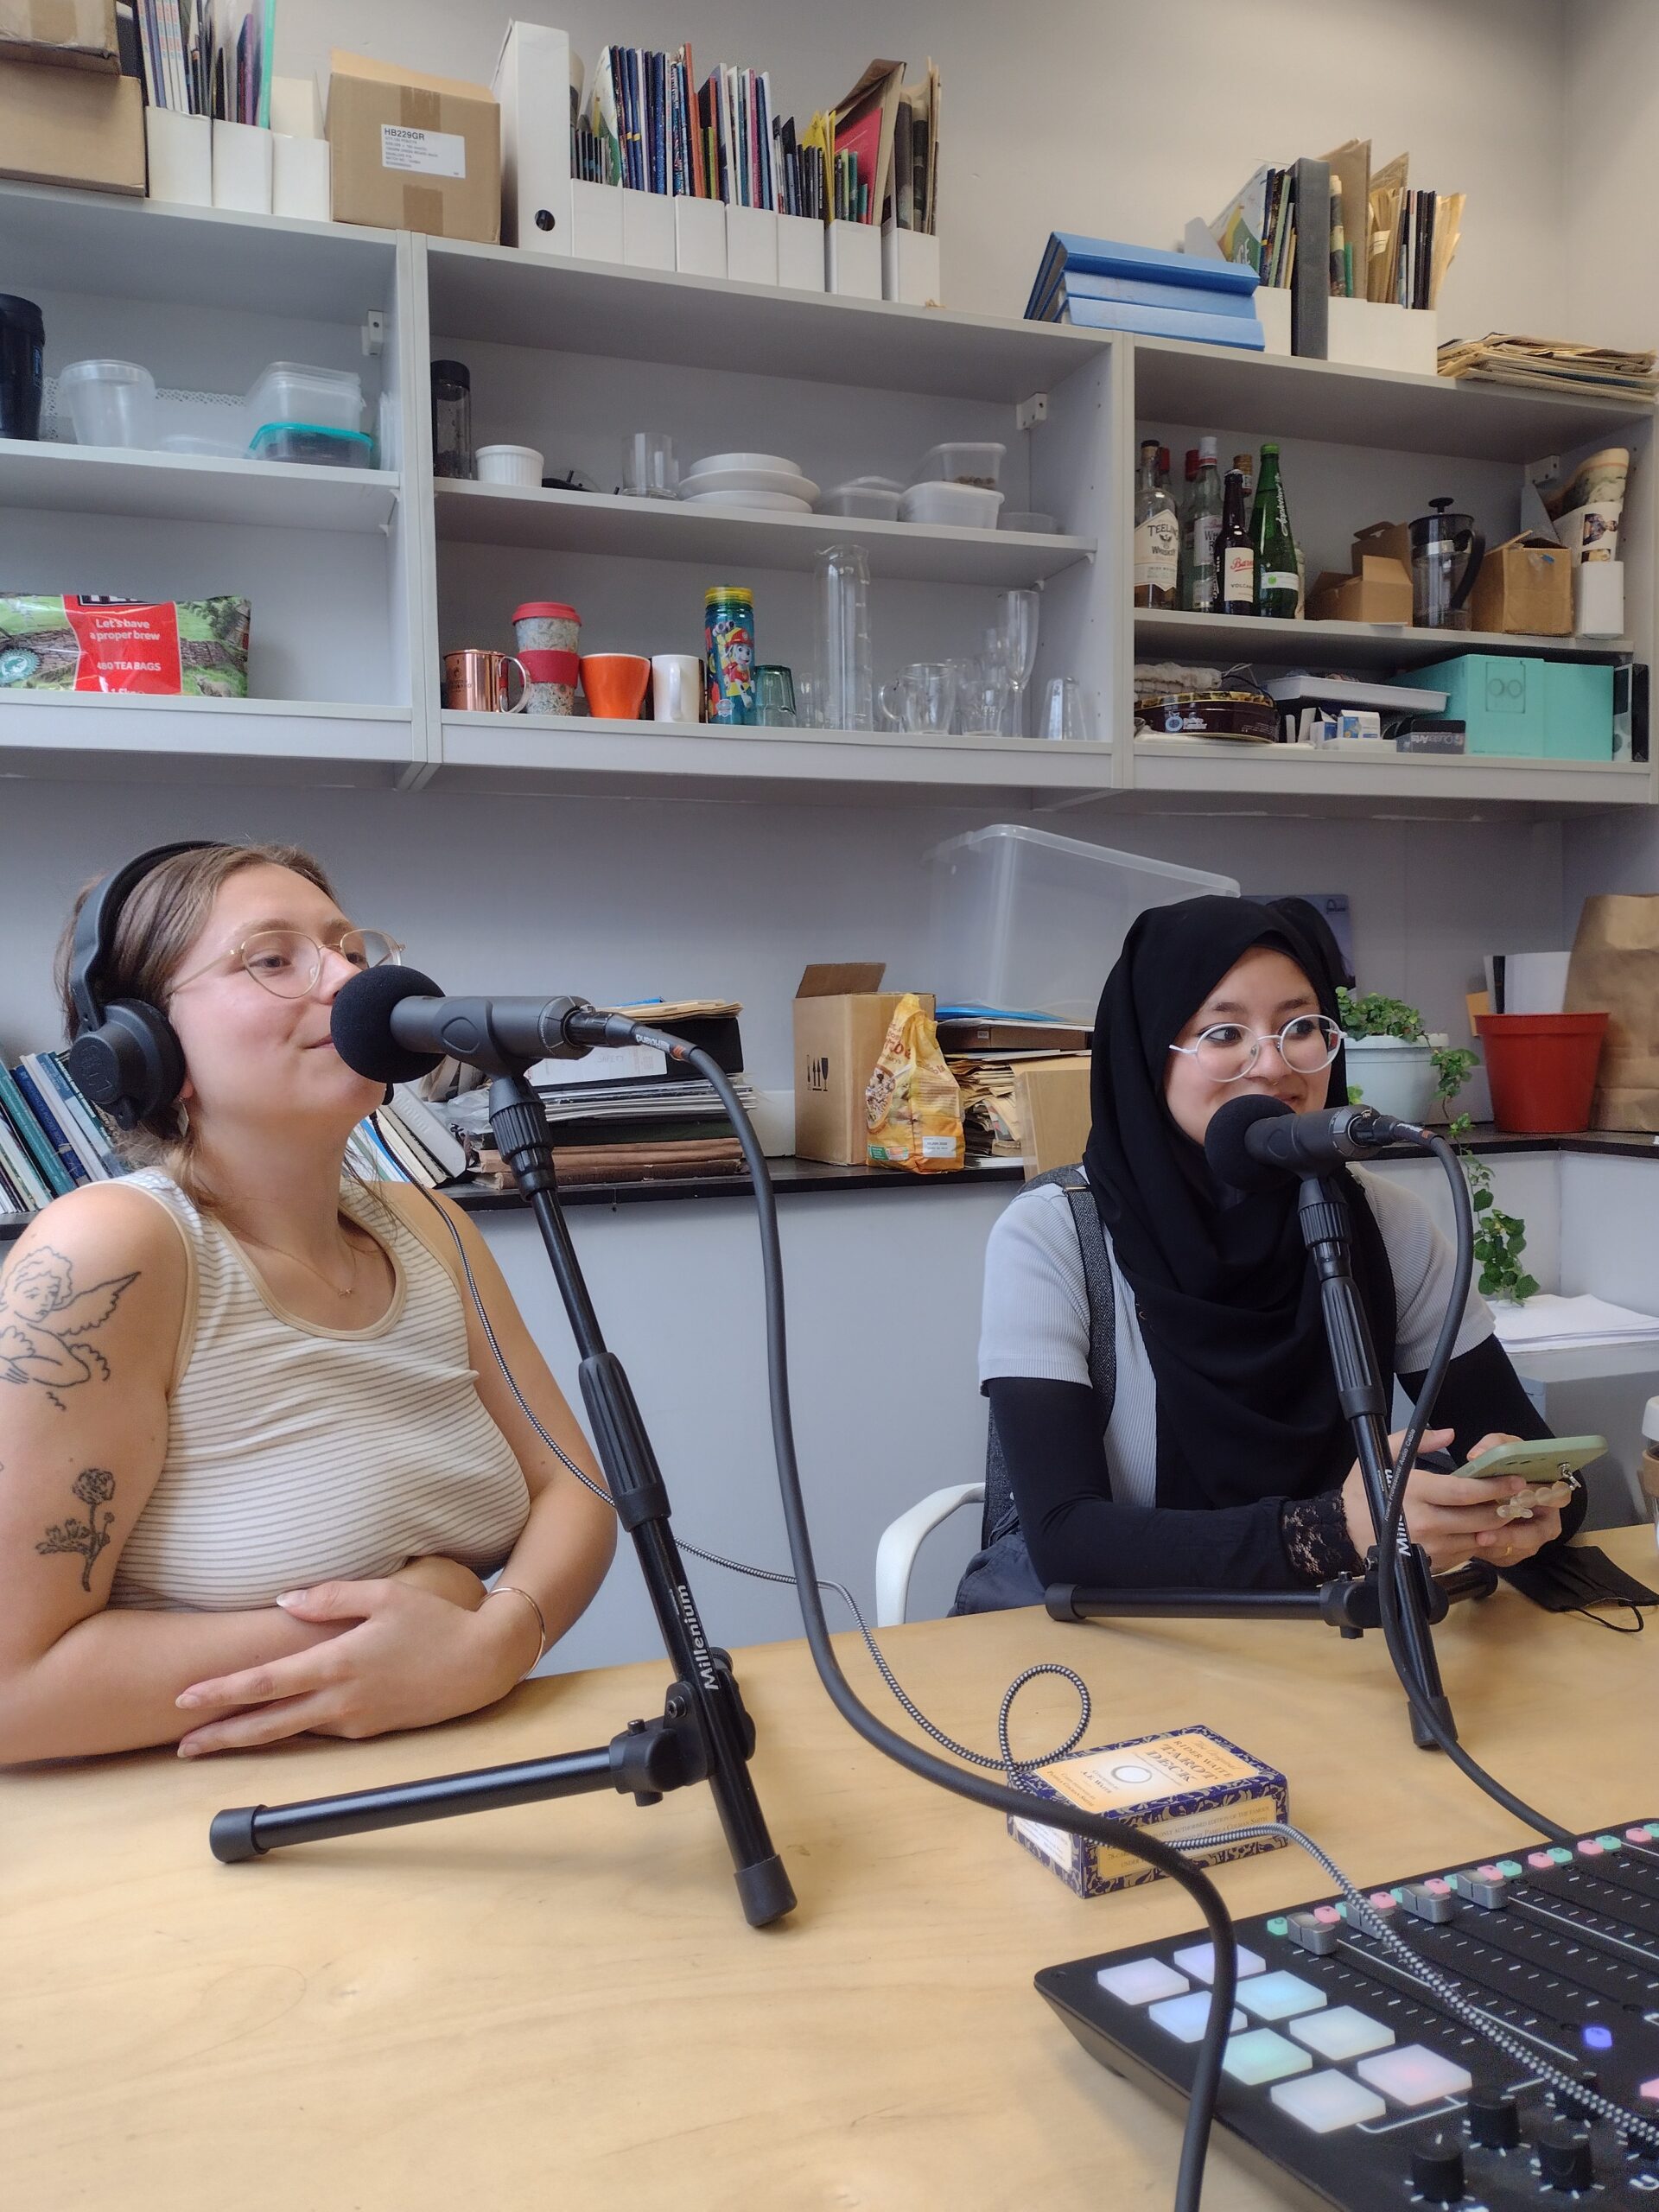 Iman and Max recording the EHFM podcast